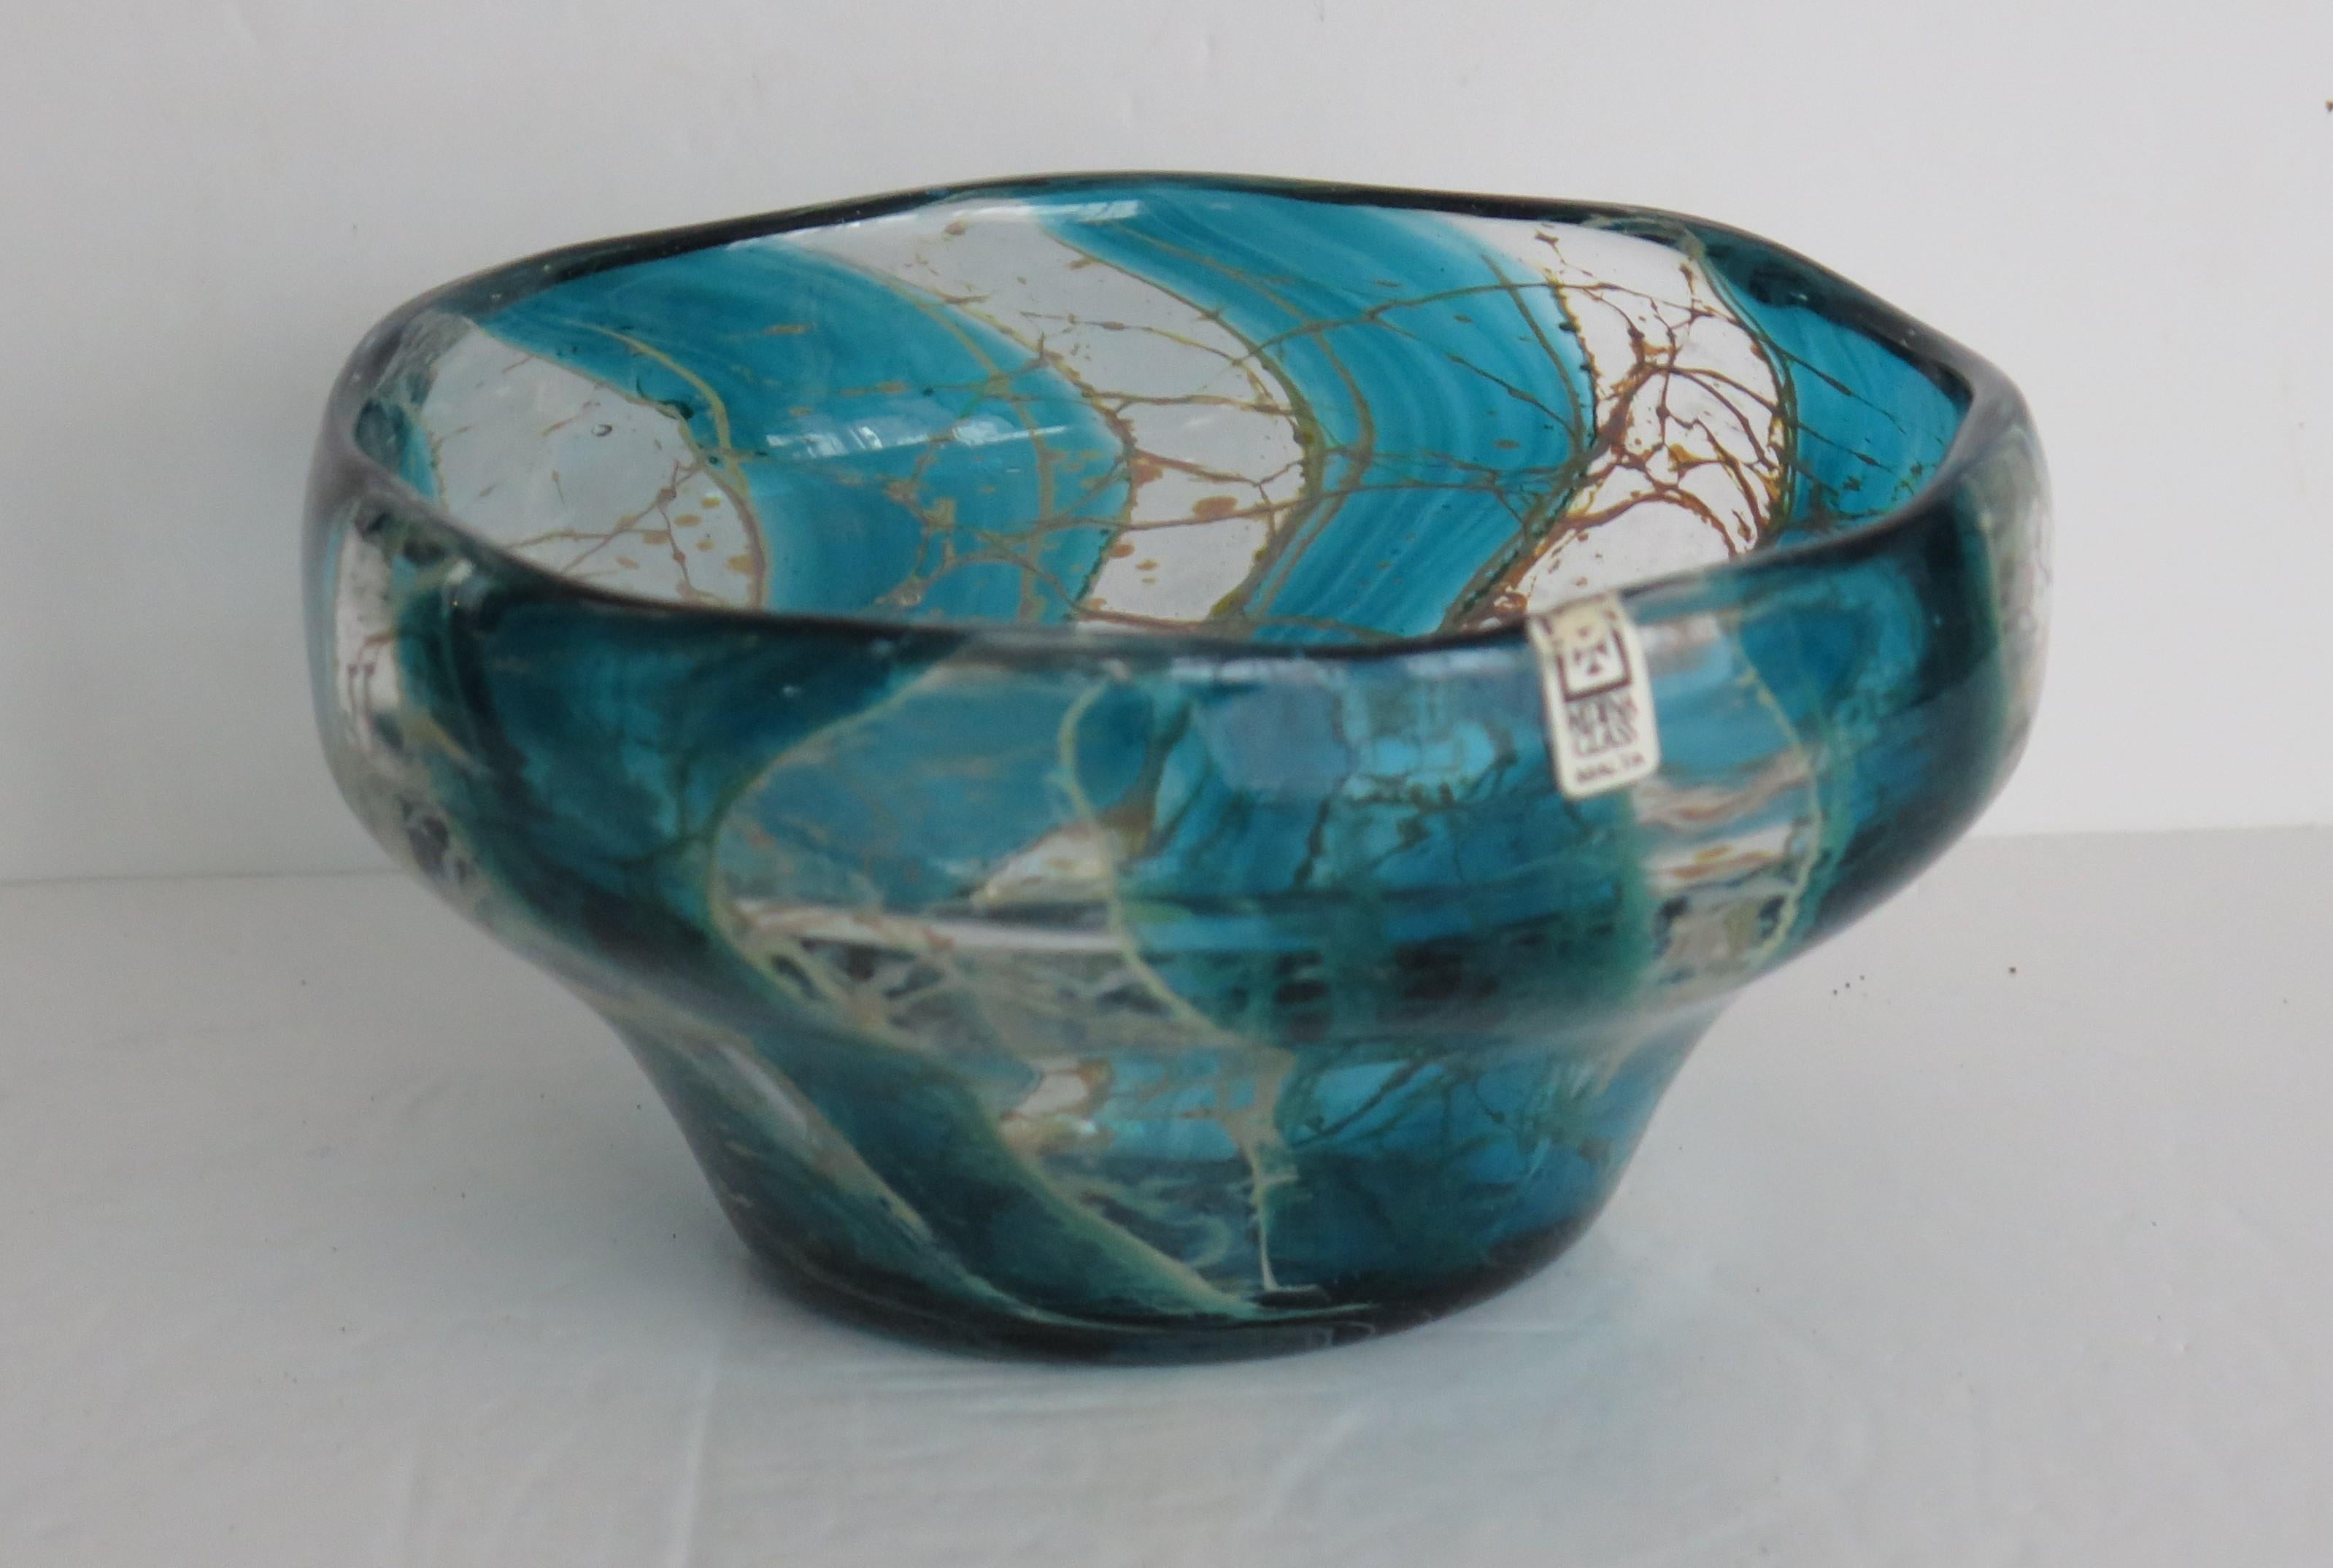 This is a beautiful Art Glass bowl made by Mdina glass, Malta during the 1970's

This bowl has a lovely shape, hand crafted in all aspects and decorated in what we think is the Crystal Blue stripe pattern. It has the original label stuck on the